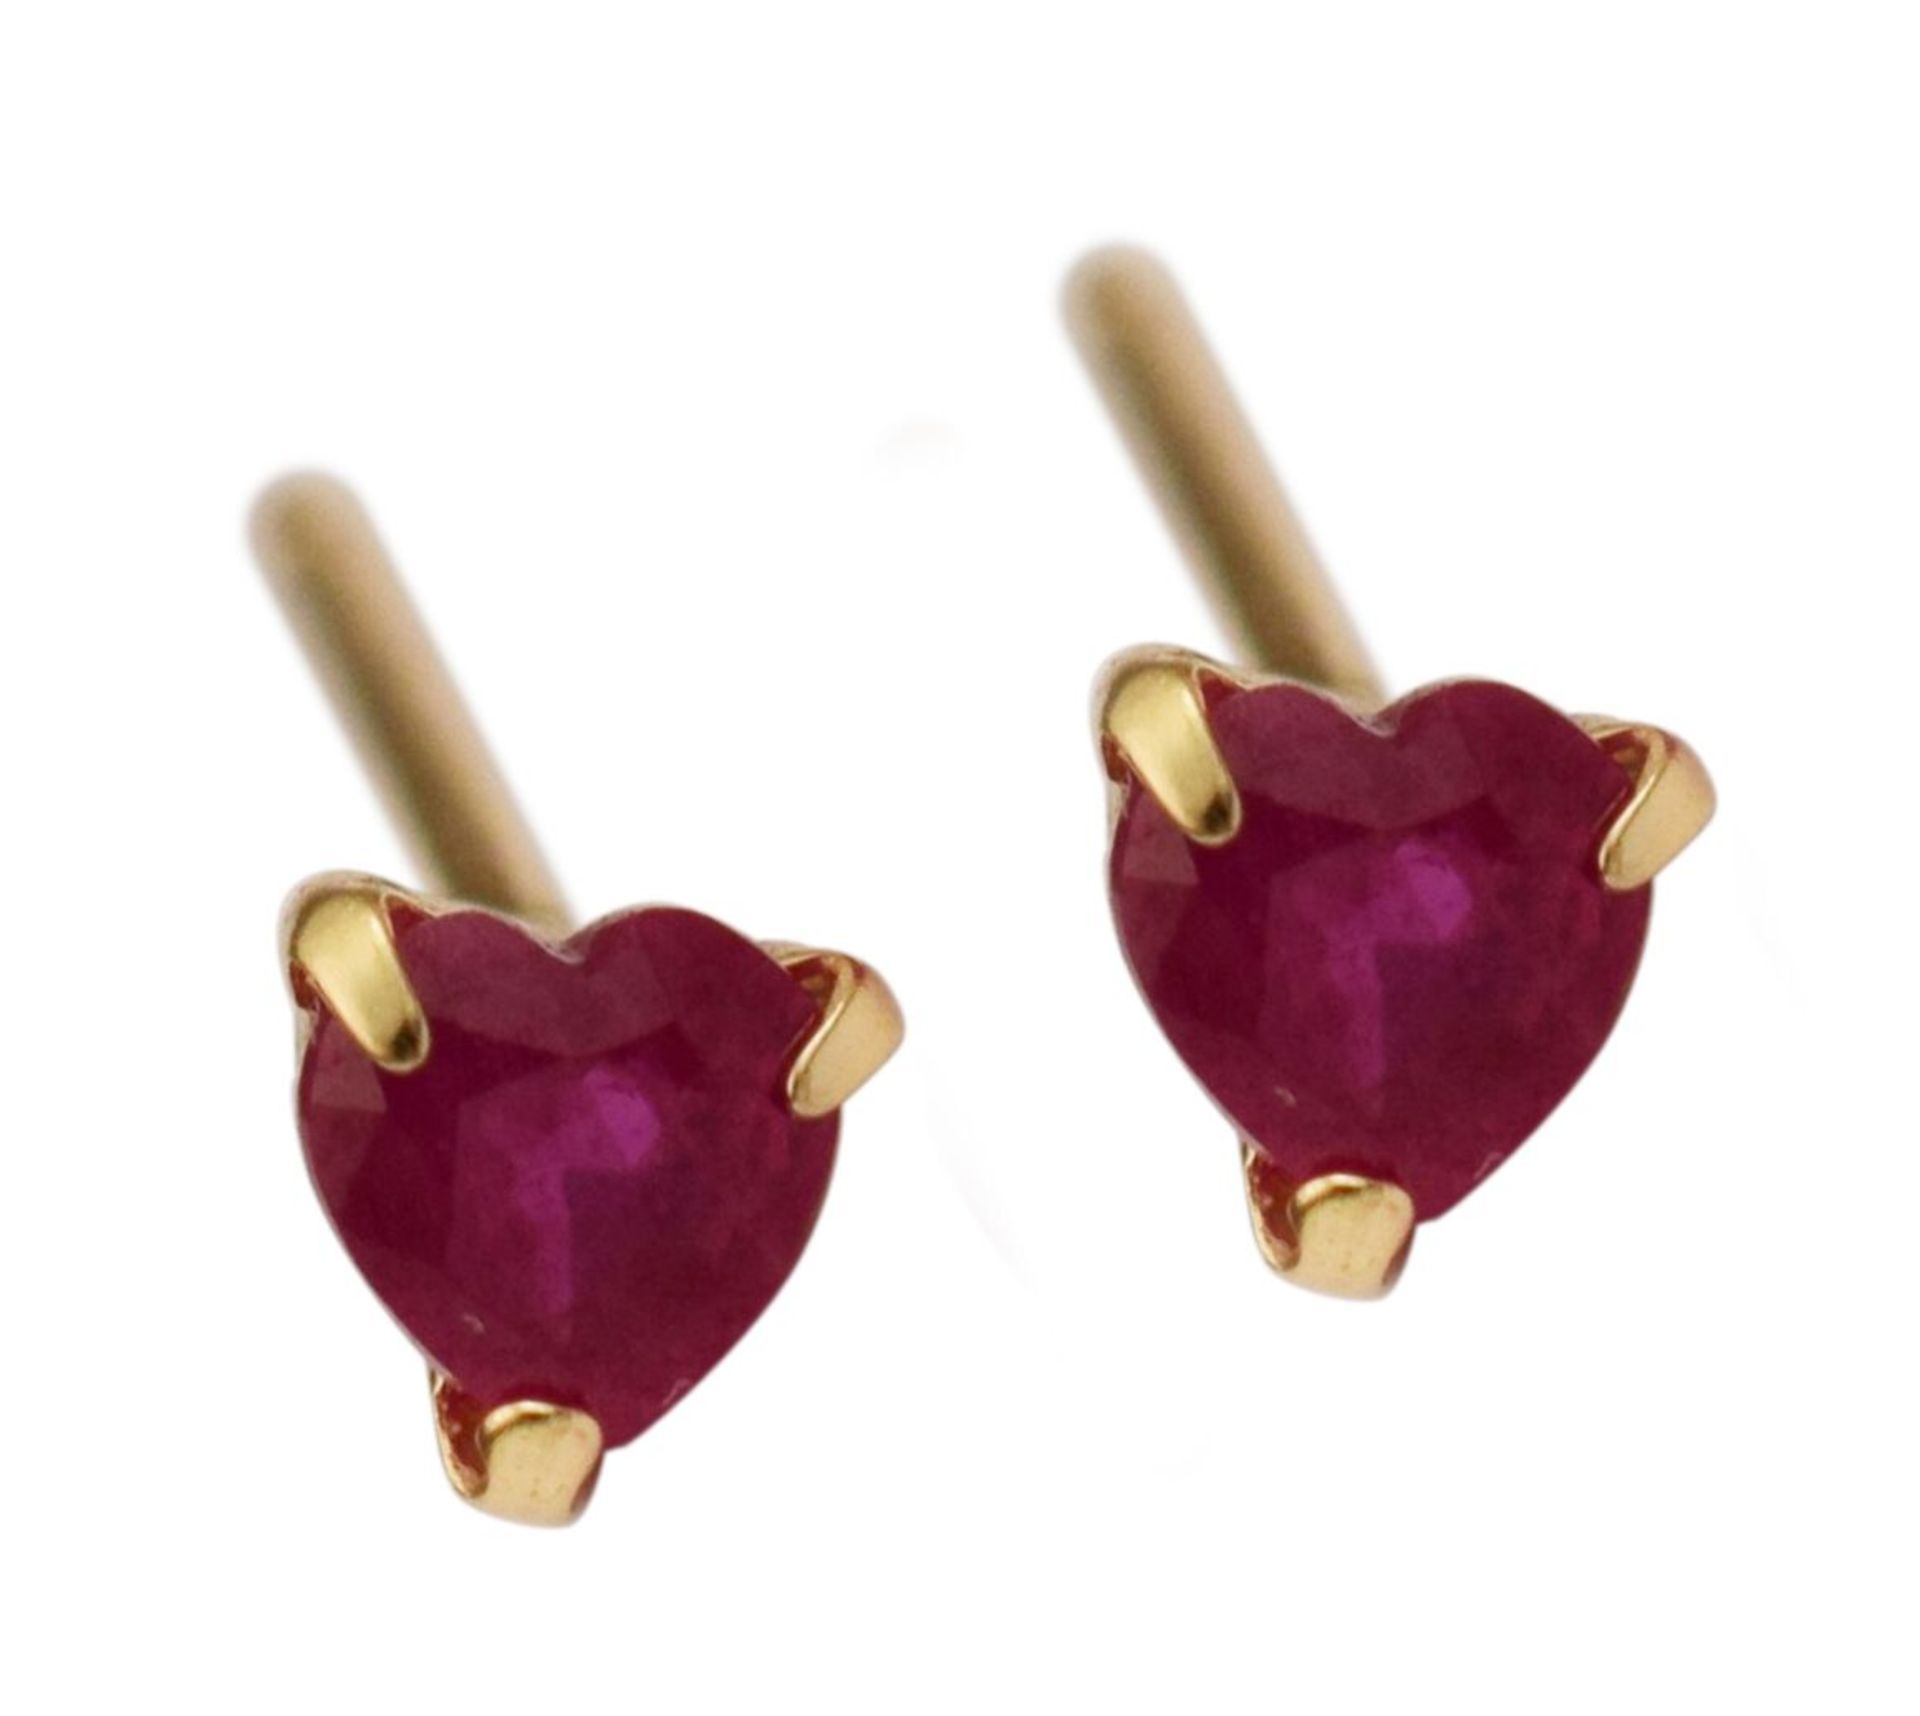 Heart Shaped Ruby Earrings, 18ct Yellow Gold RRP £229 Weight 0.36g, Diamond Weight 0.2ct, Colour 0.